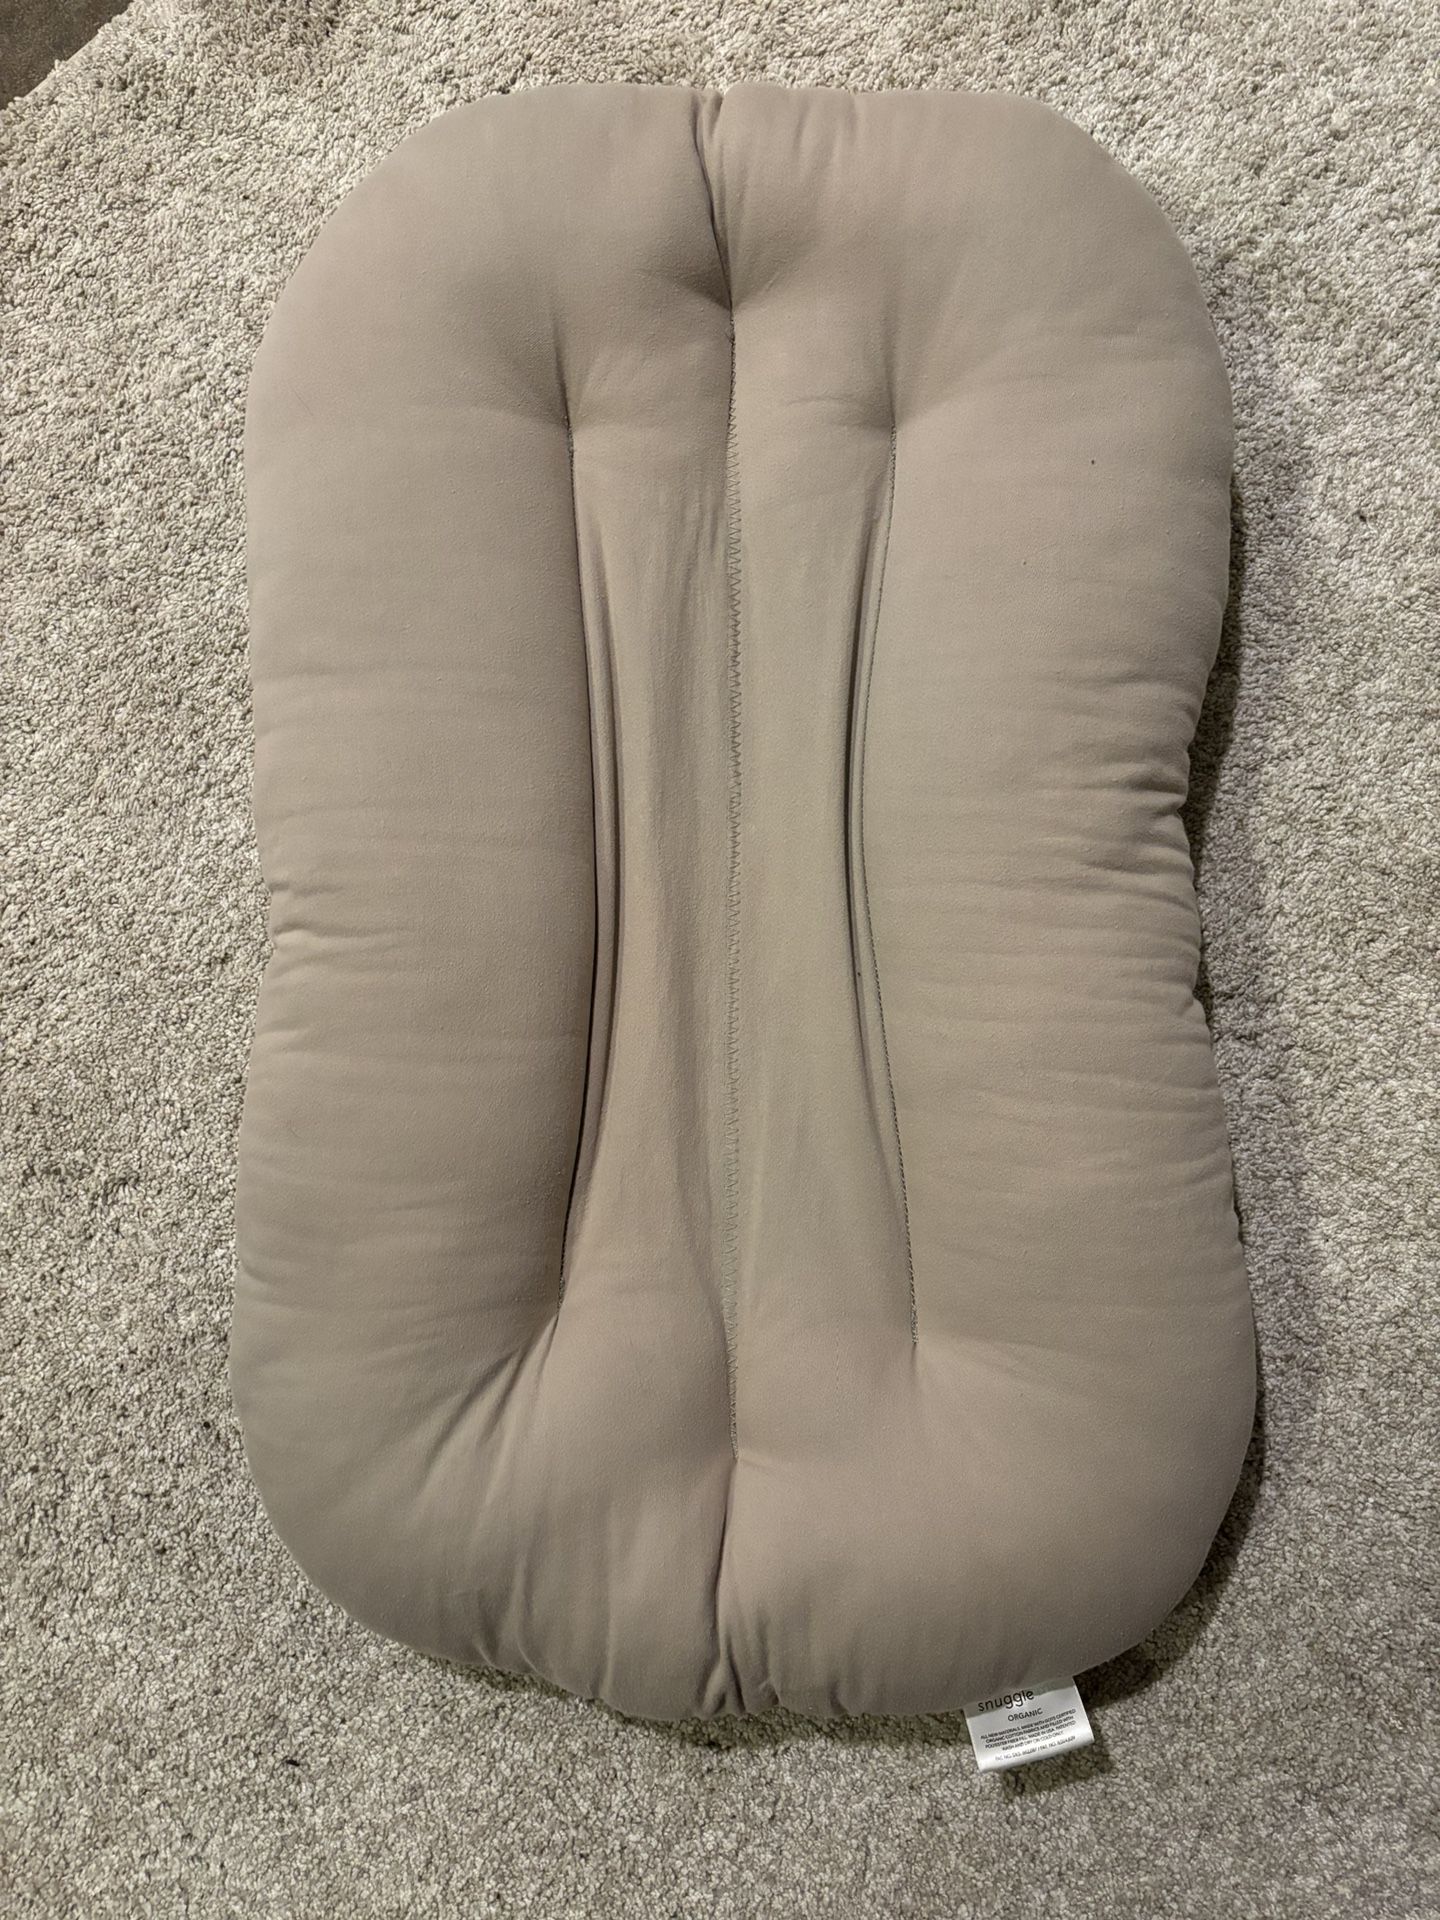 SnuggleMe Baby Lounger